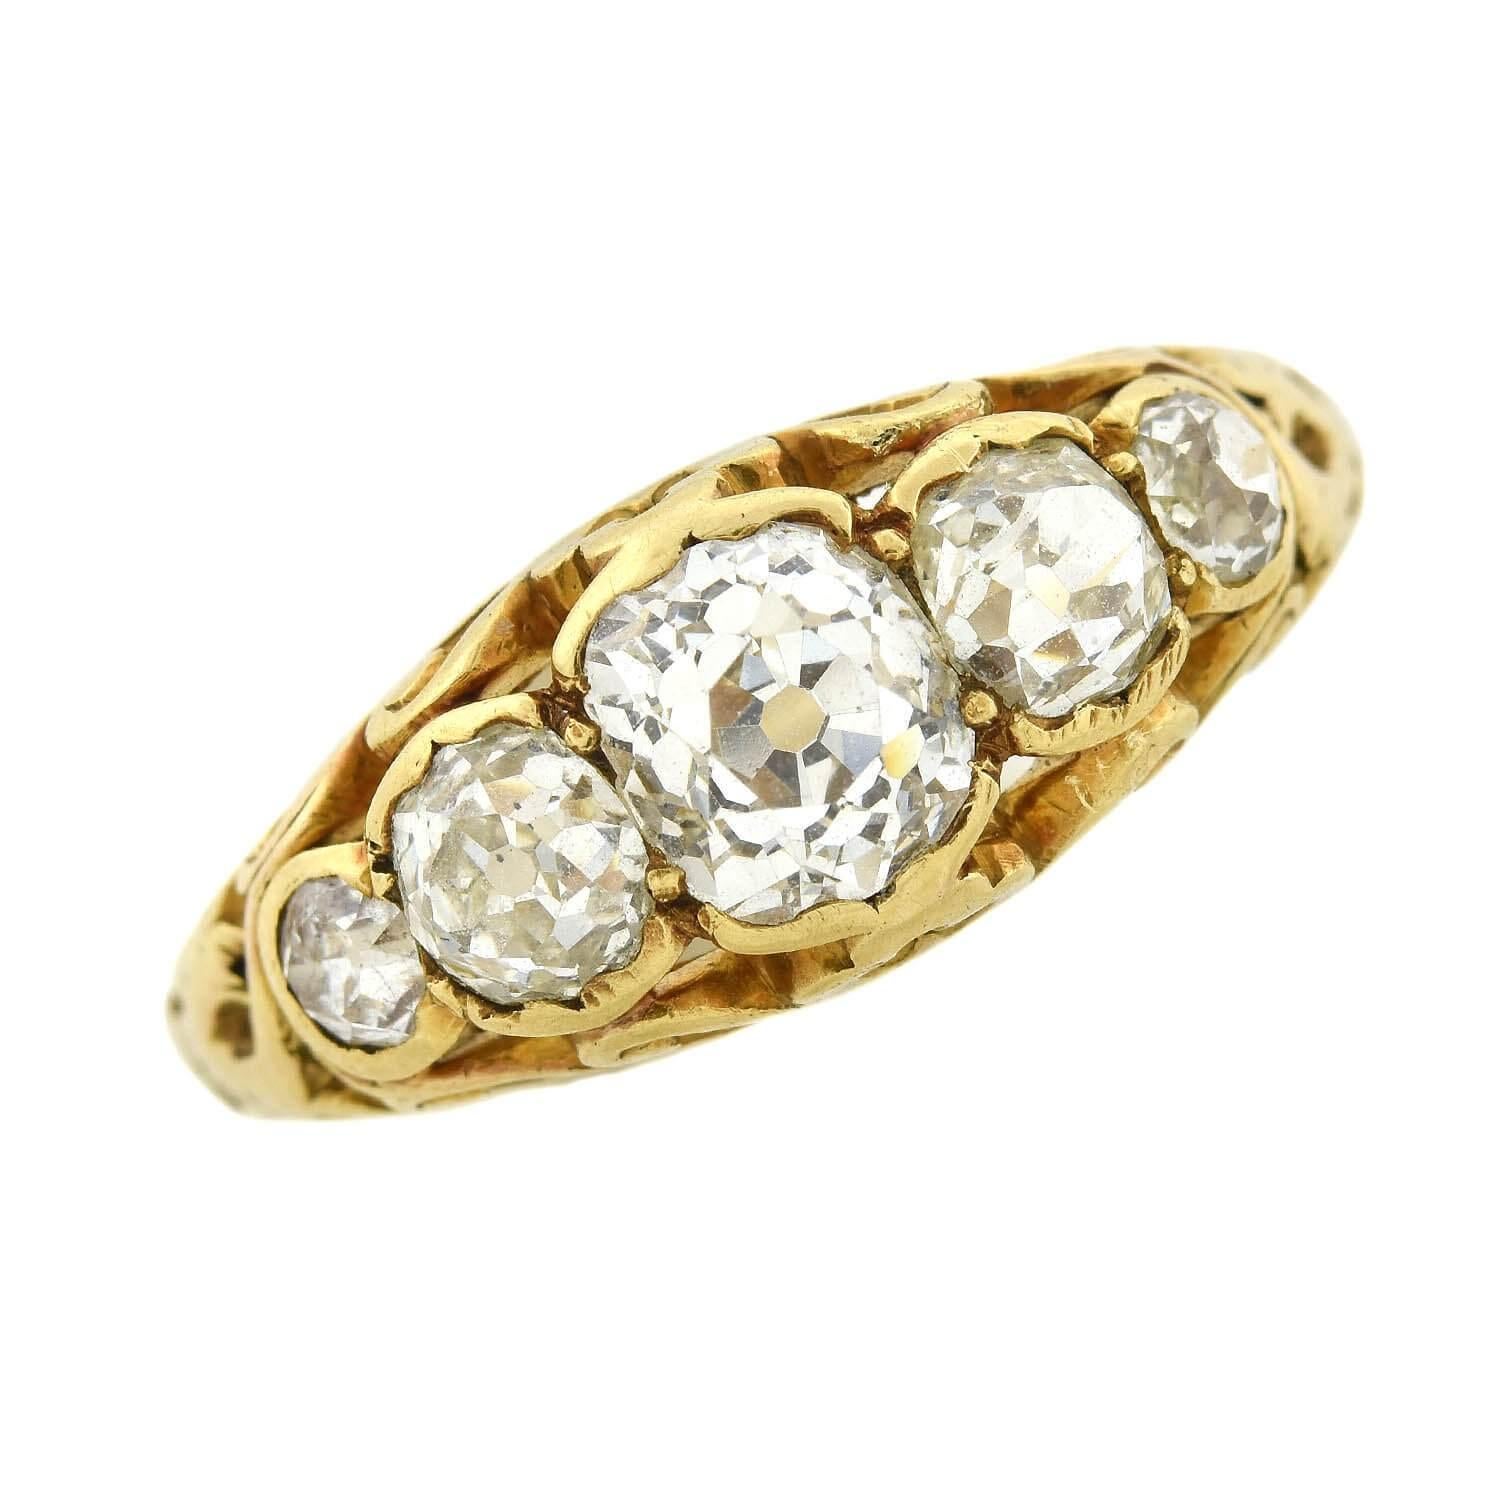 Victorian 18kt Mine Cut Diamond 5-Stone Ring 2.00ctw In Fair Condition For Sale In Narberth, PA